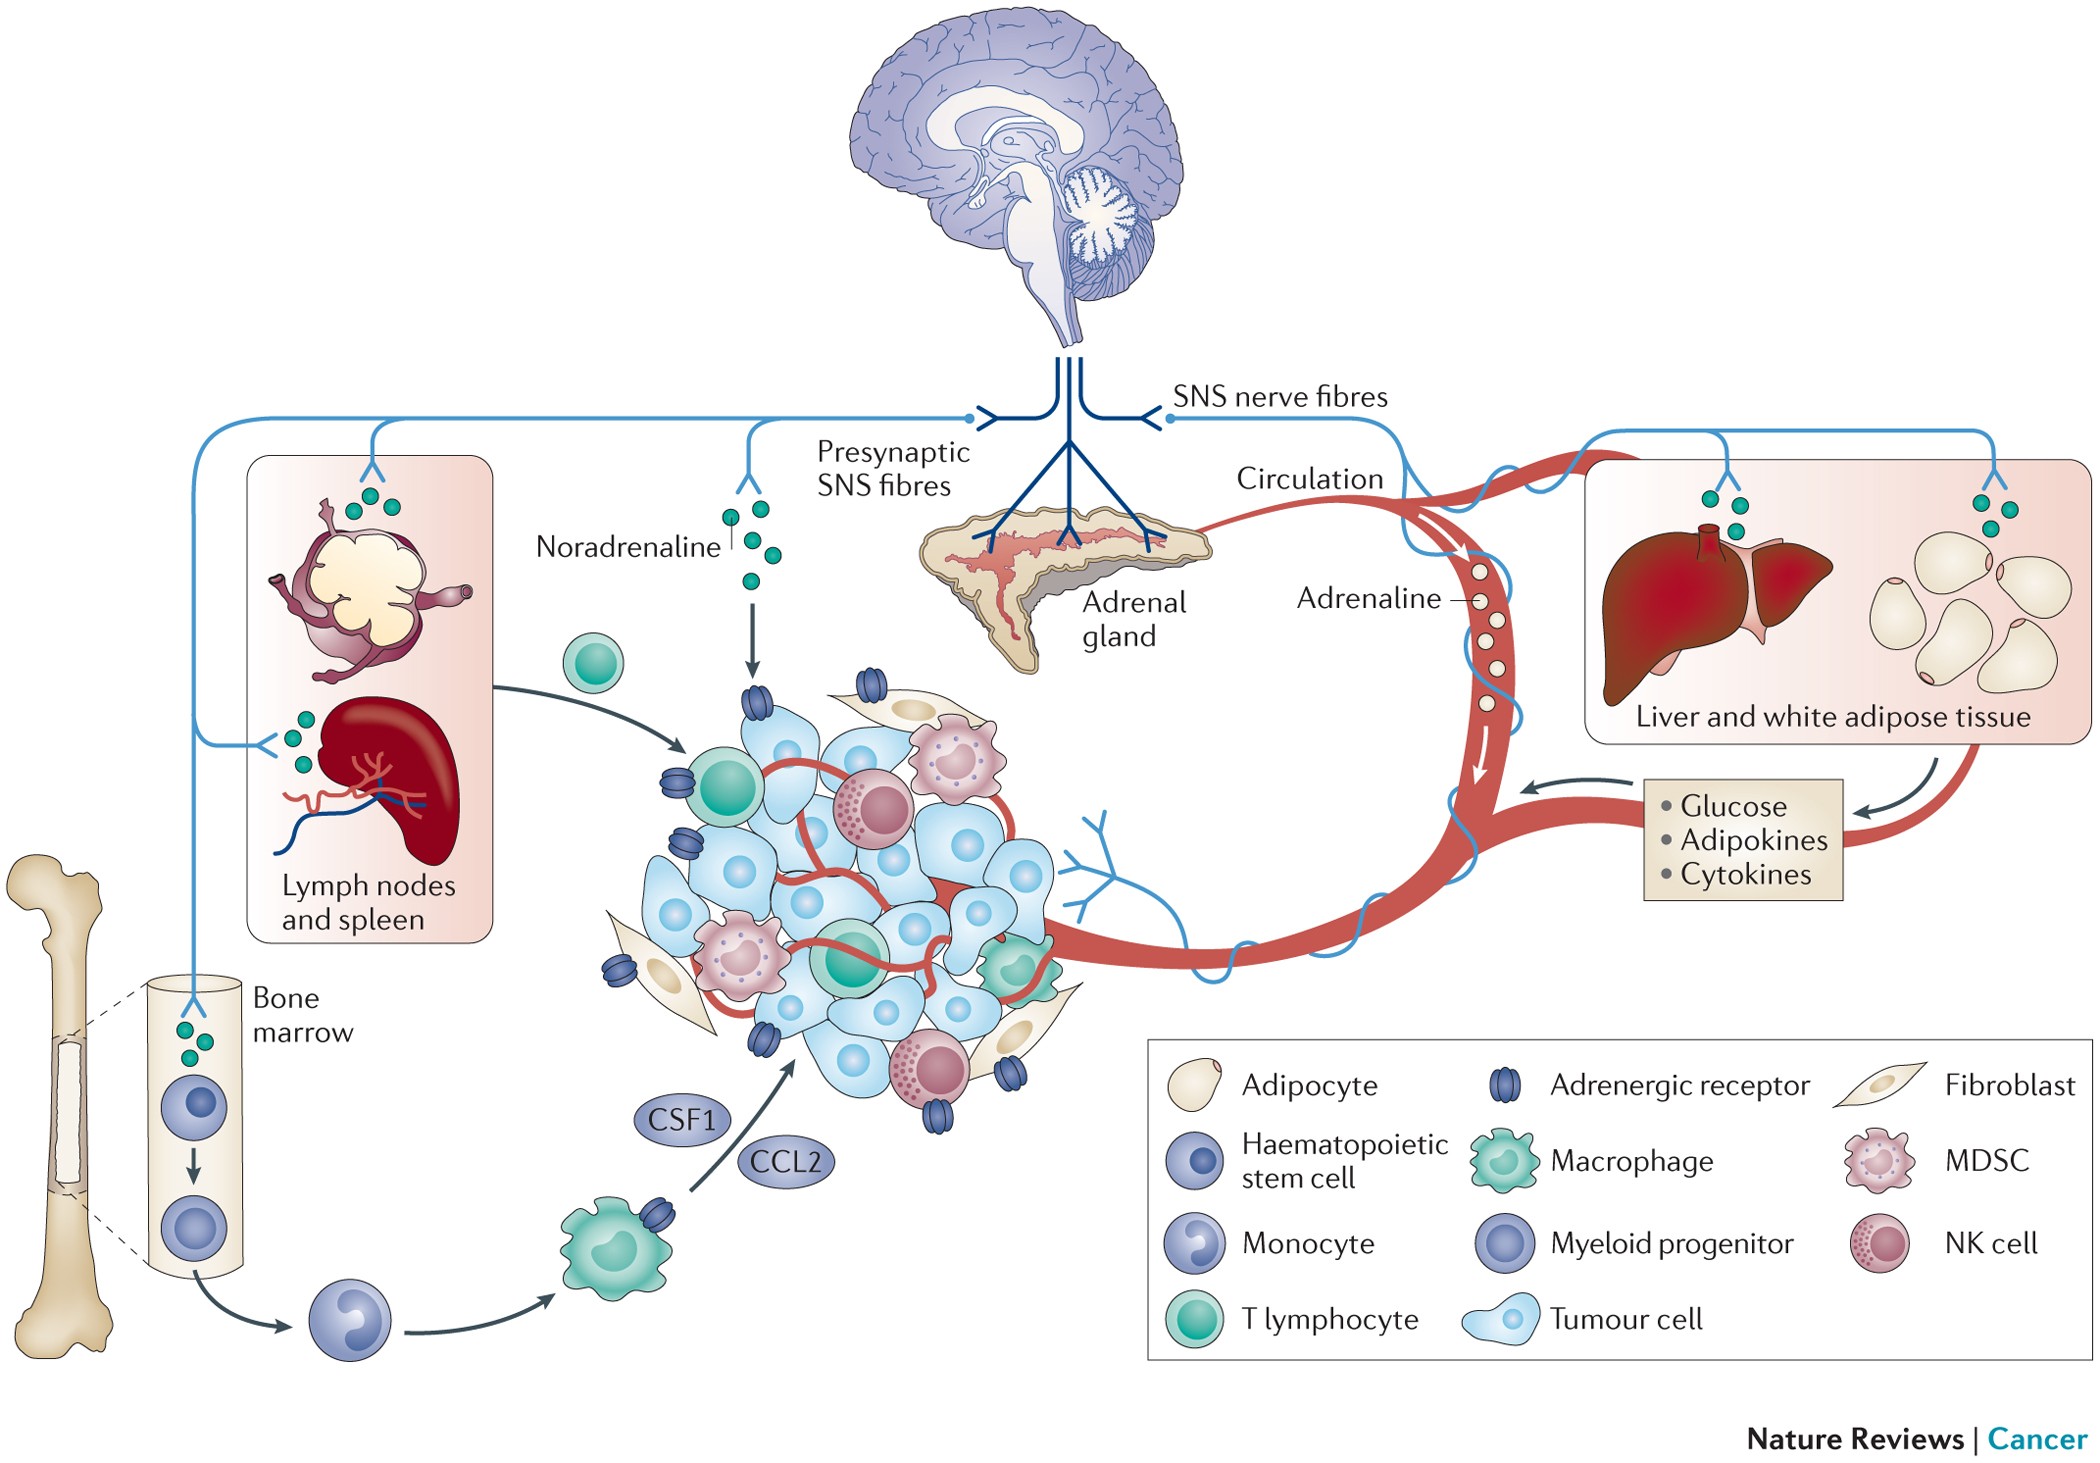 Sympathetic nervous system regulation of the tumour microenvironment |  Nature Reviews Cancer